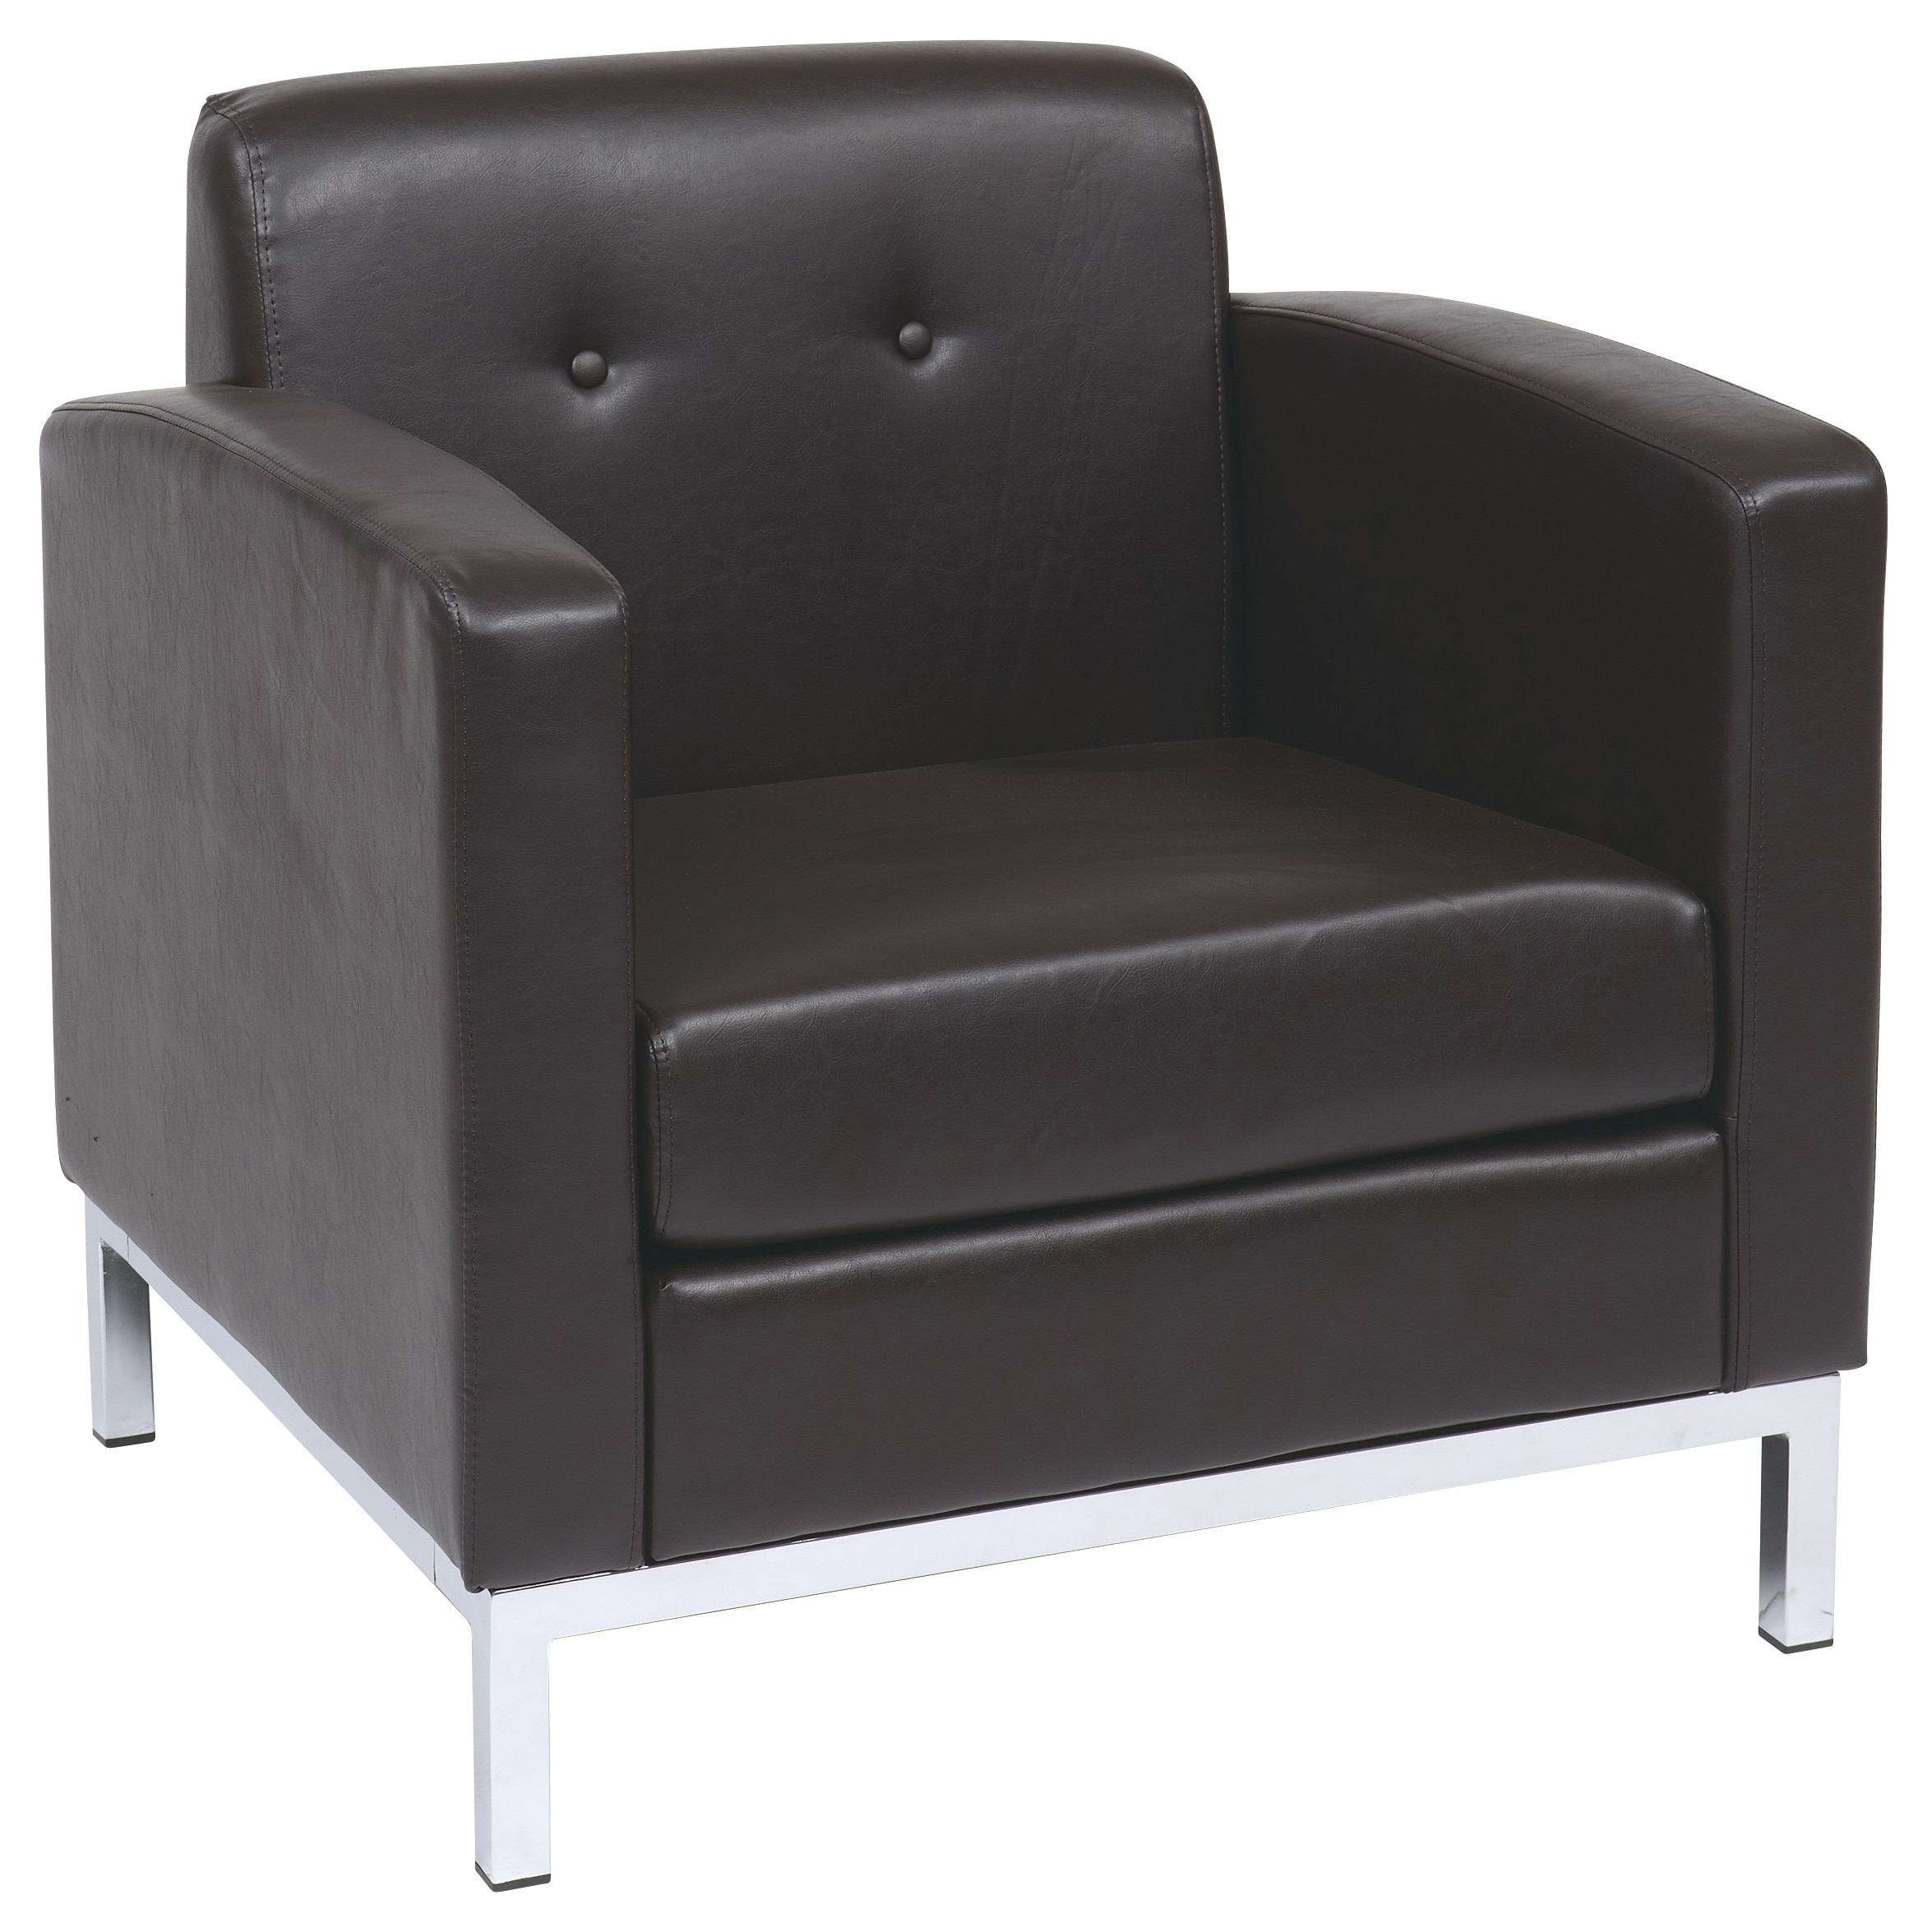 Osp Home Furnishings Wall Street Faux Leather Club Chair On Sale Overstock 7894820